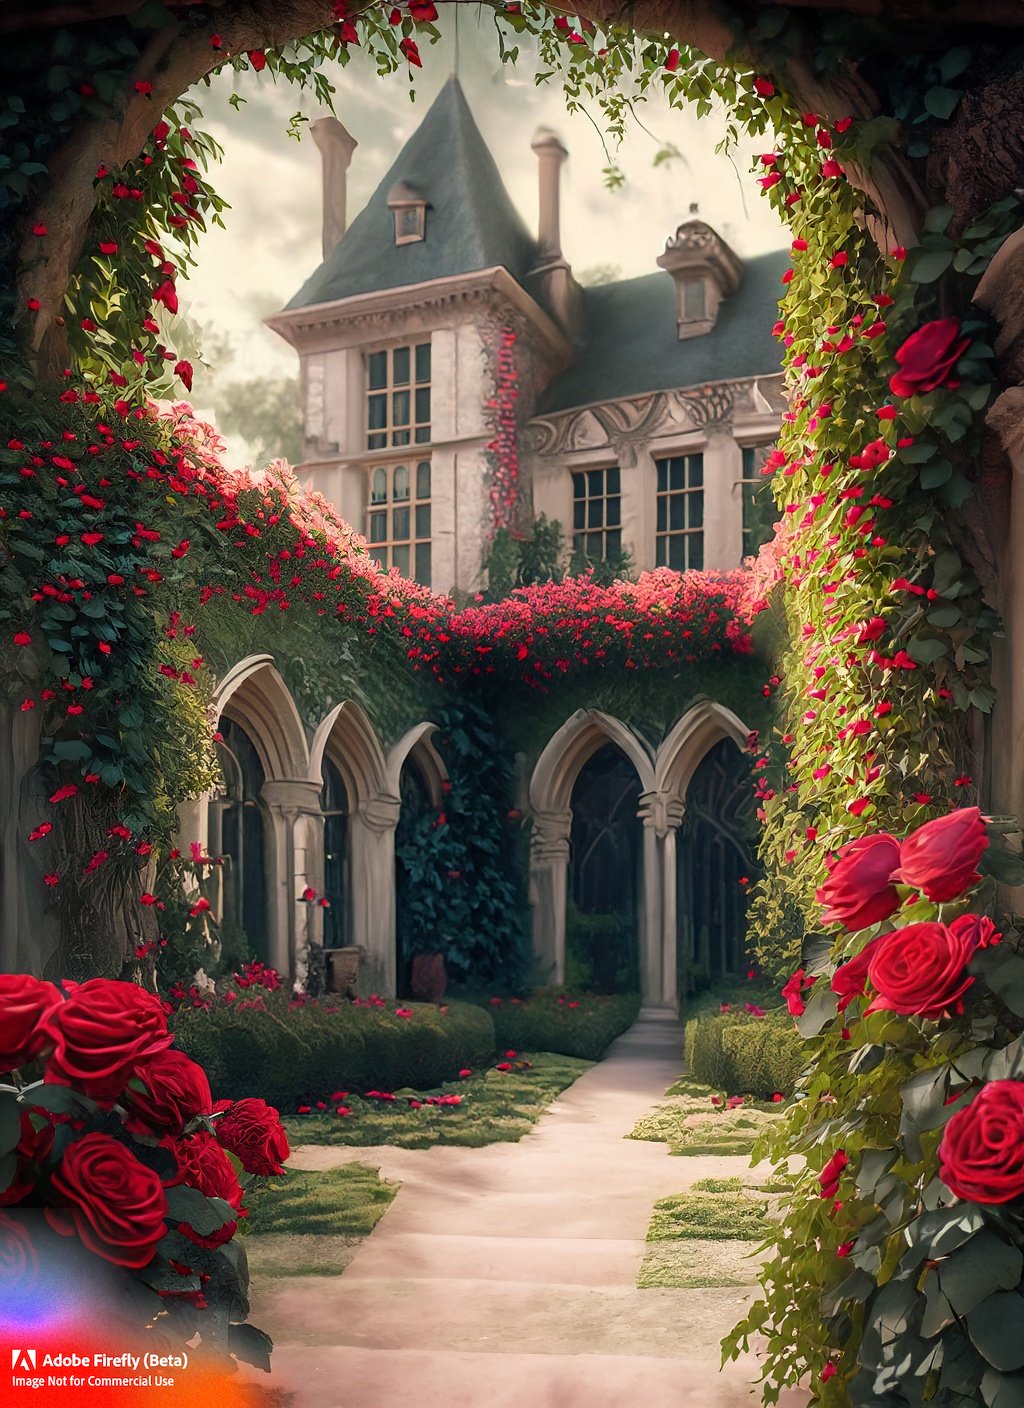 Firefly_a+court of thorns and roses, red roses, mansion with vines, garden courtyard, fairytale vibes_photo_94641.jpg